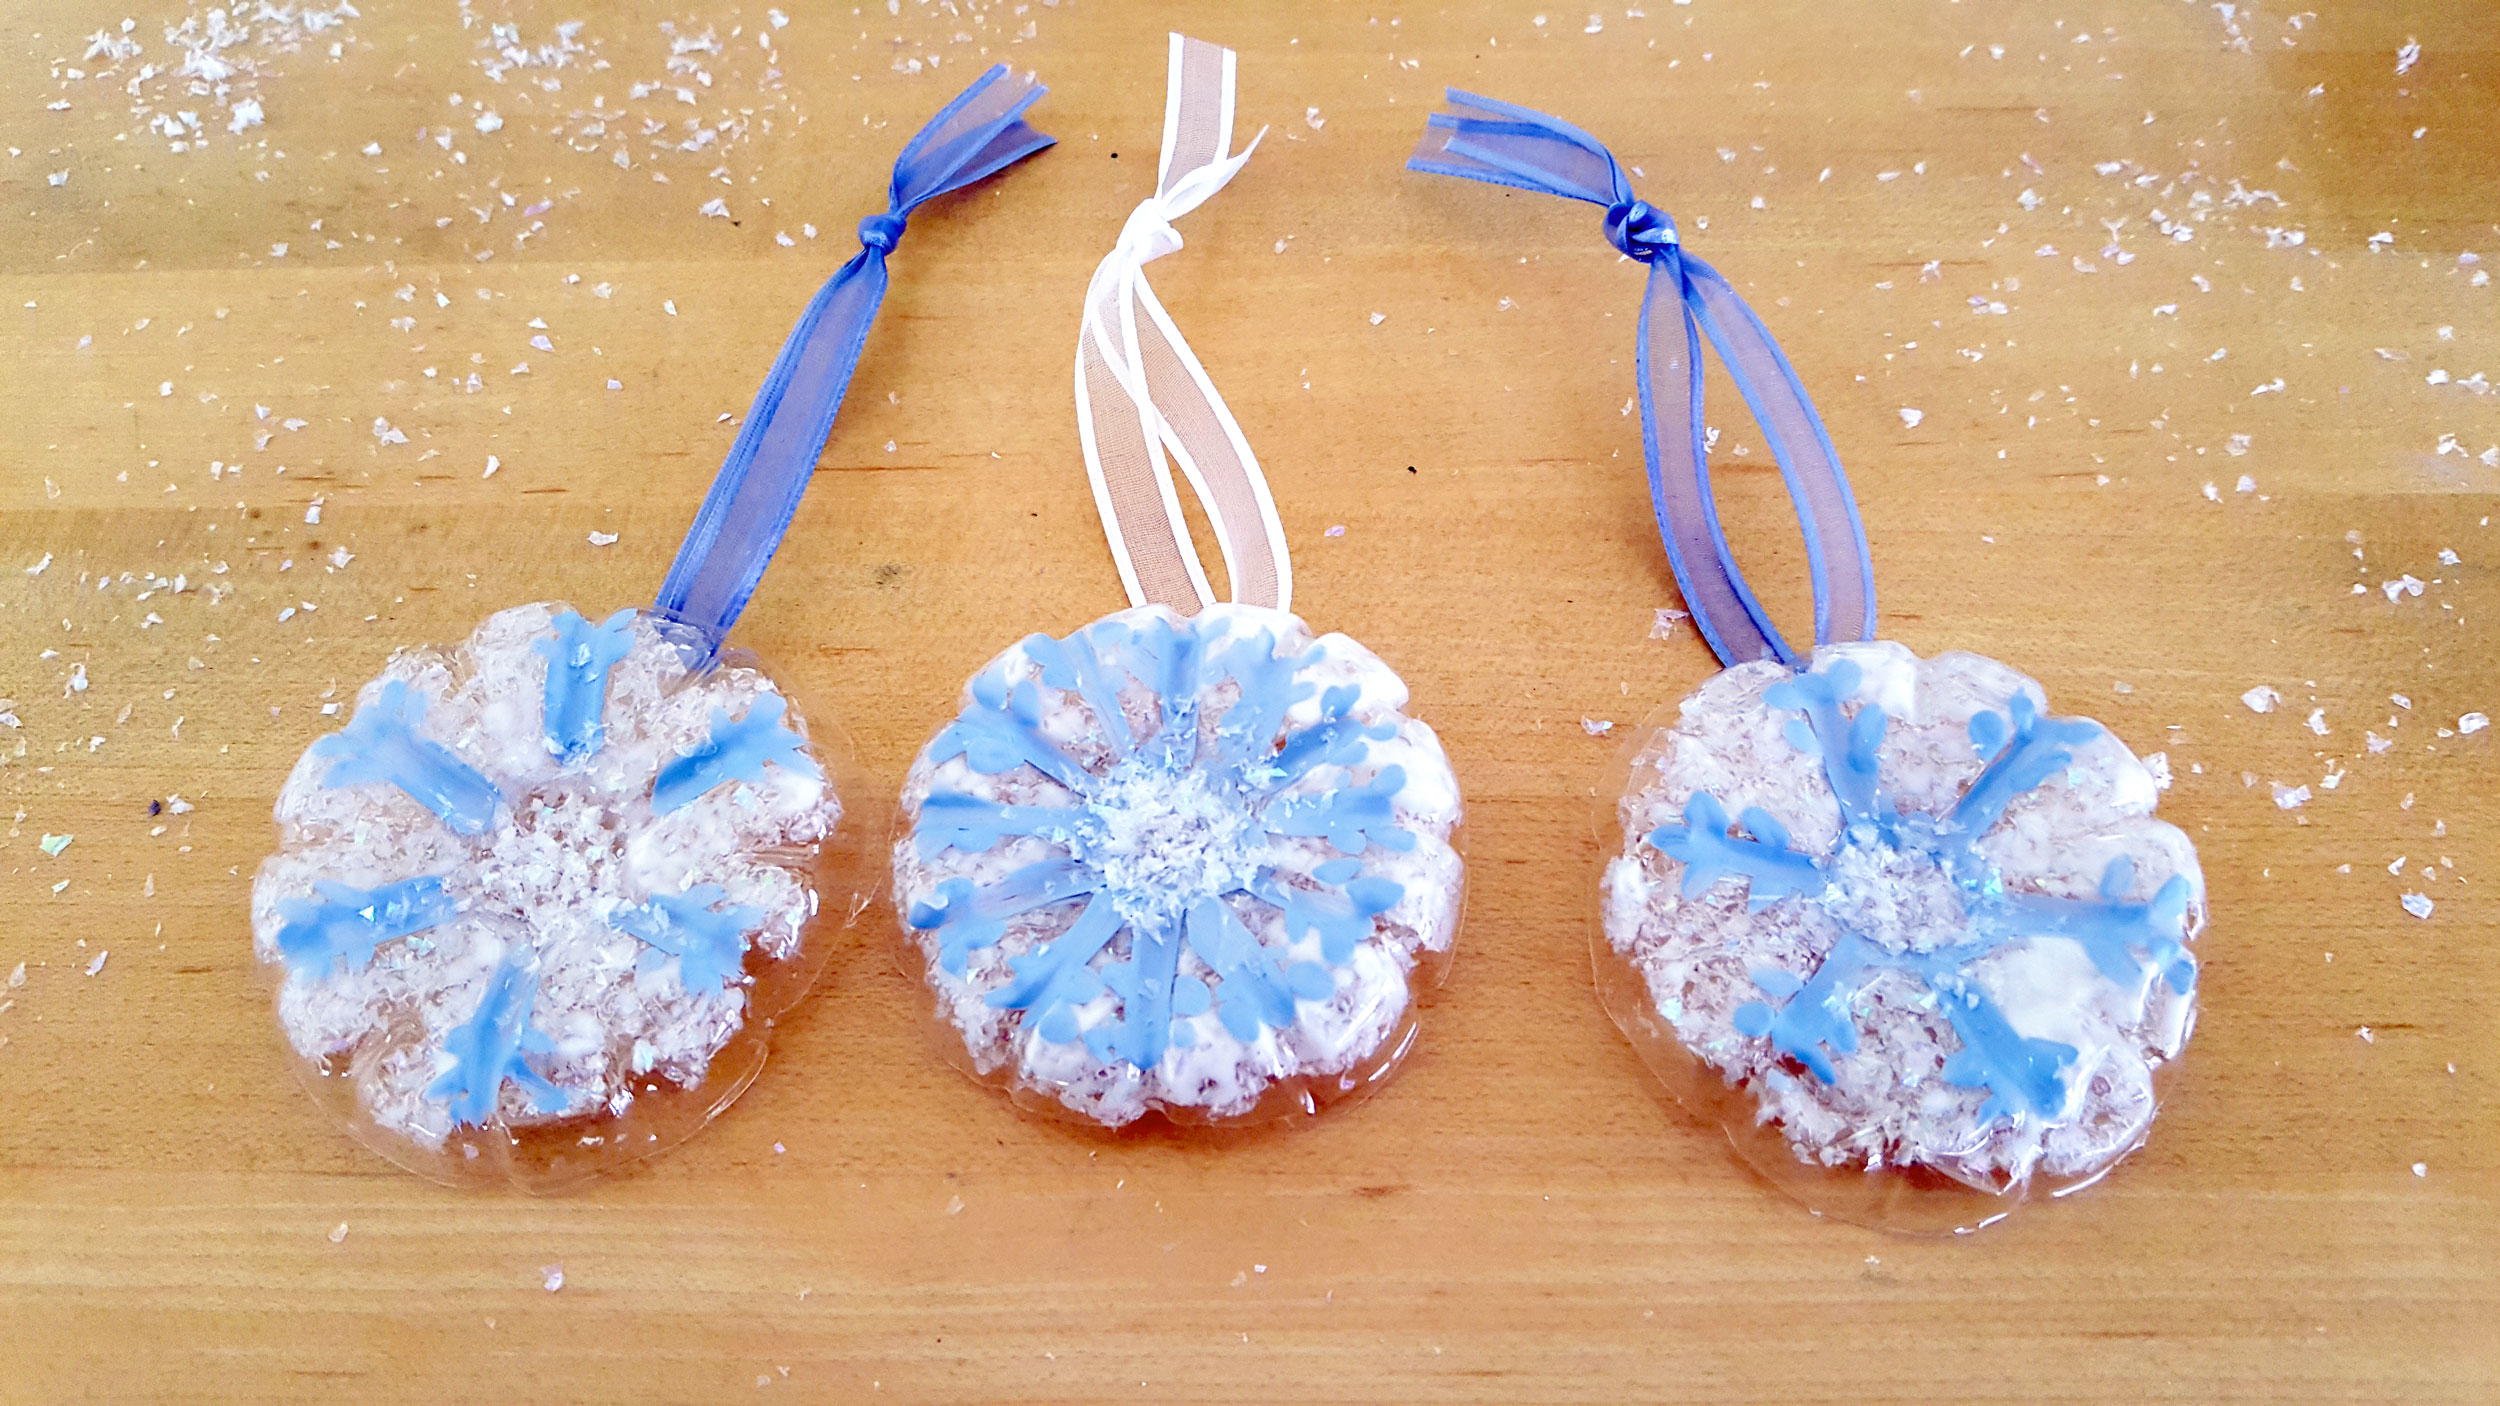 Finished Snowflake Ornaments on table. | OrnamentShop.com